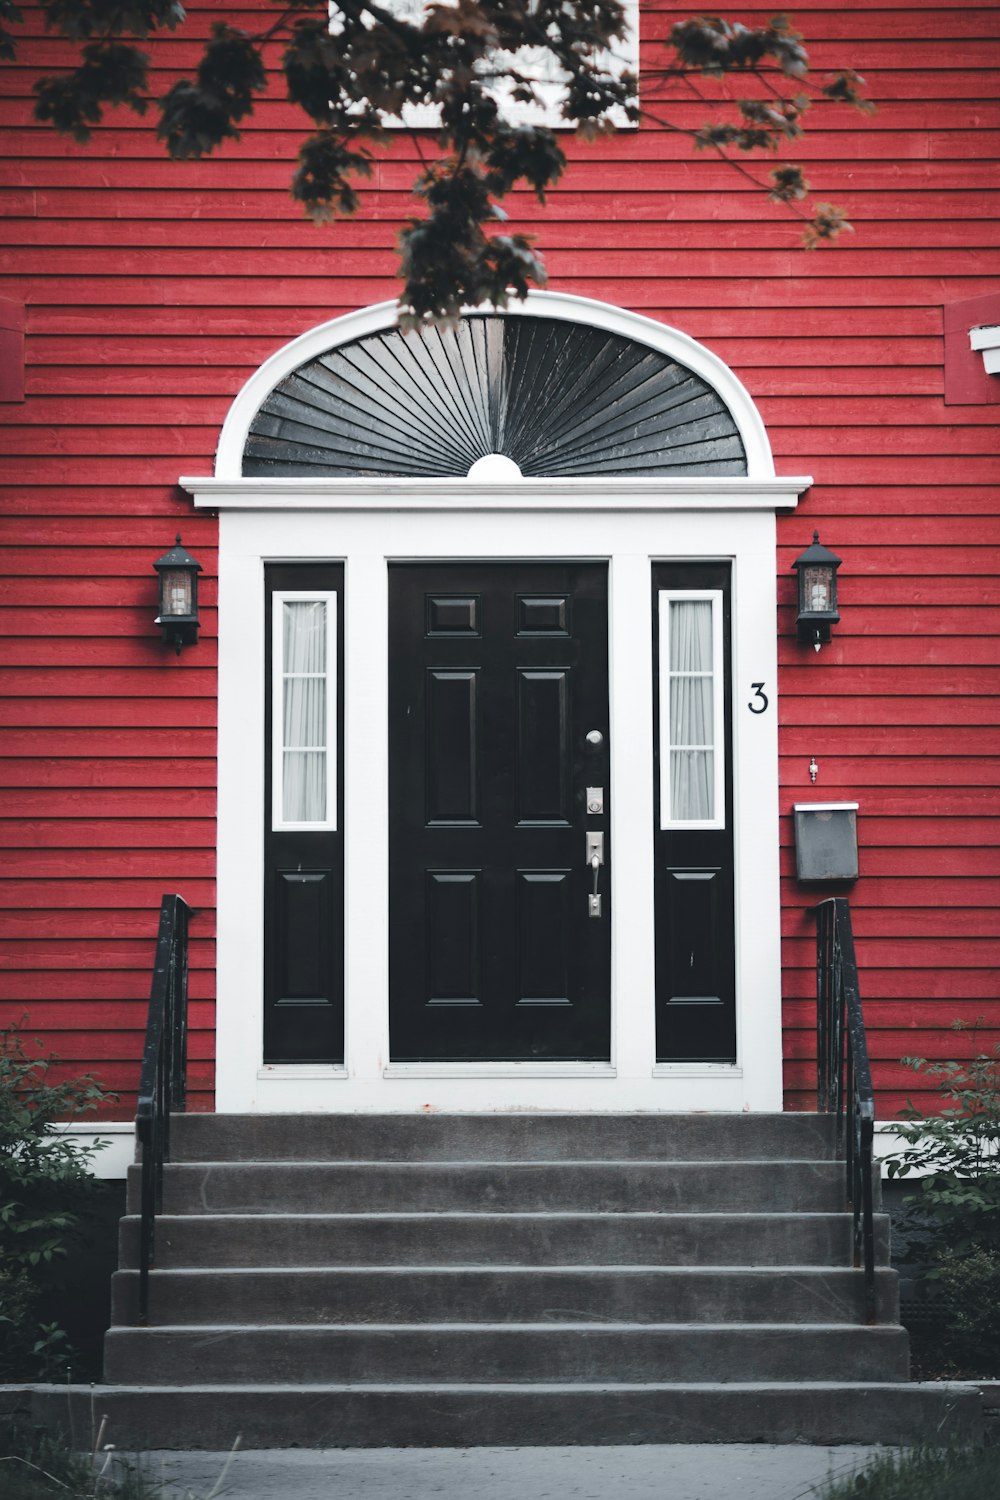 a red building with a black door